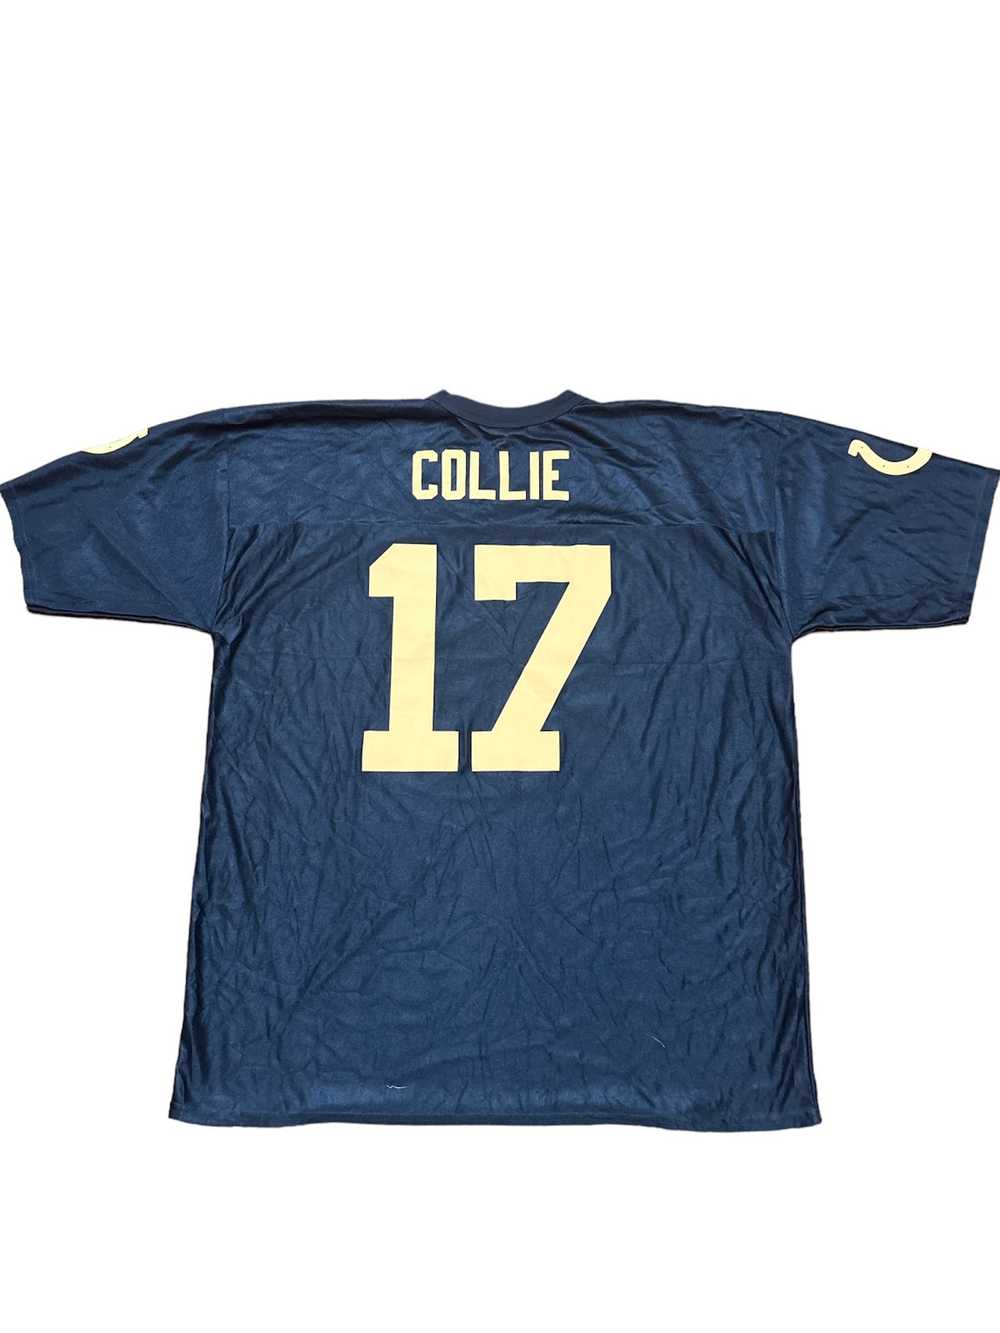 NFL Indianapolis colts nfl collie jersey - image 6